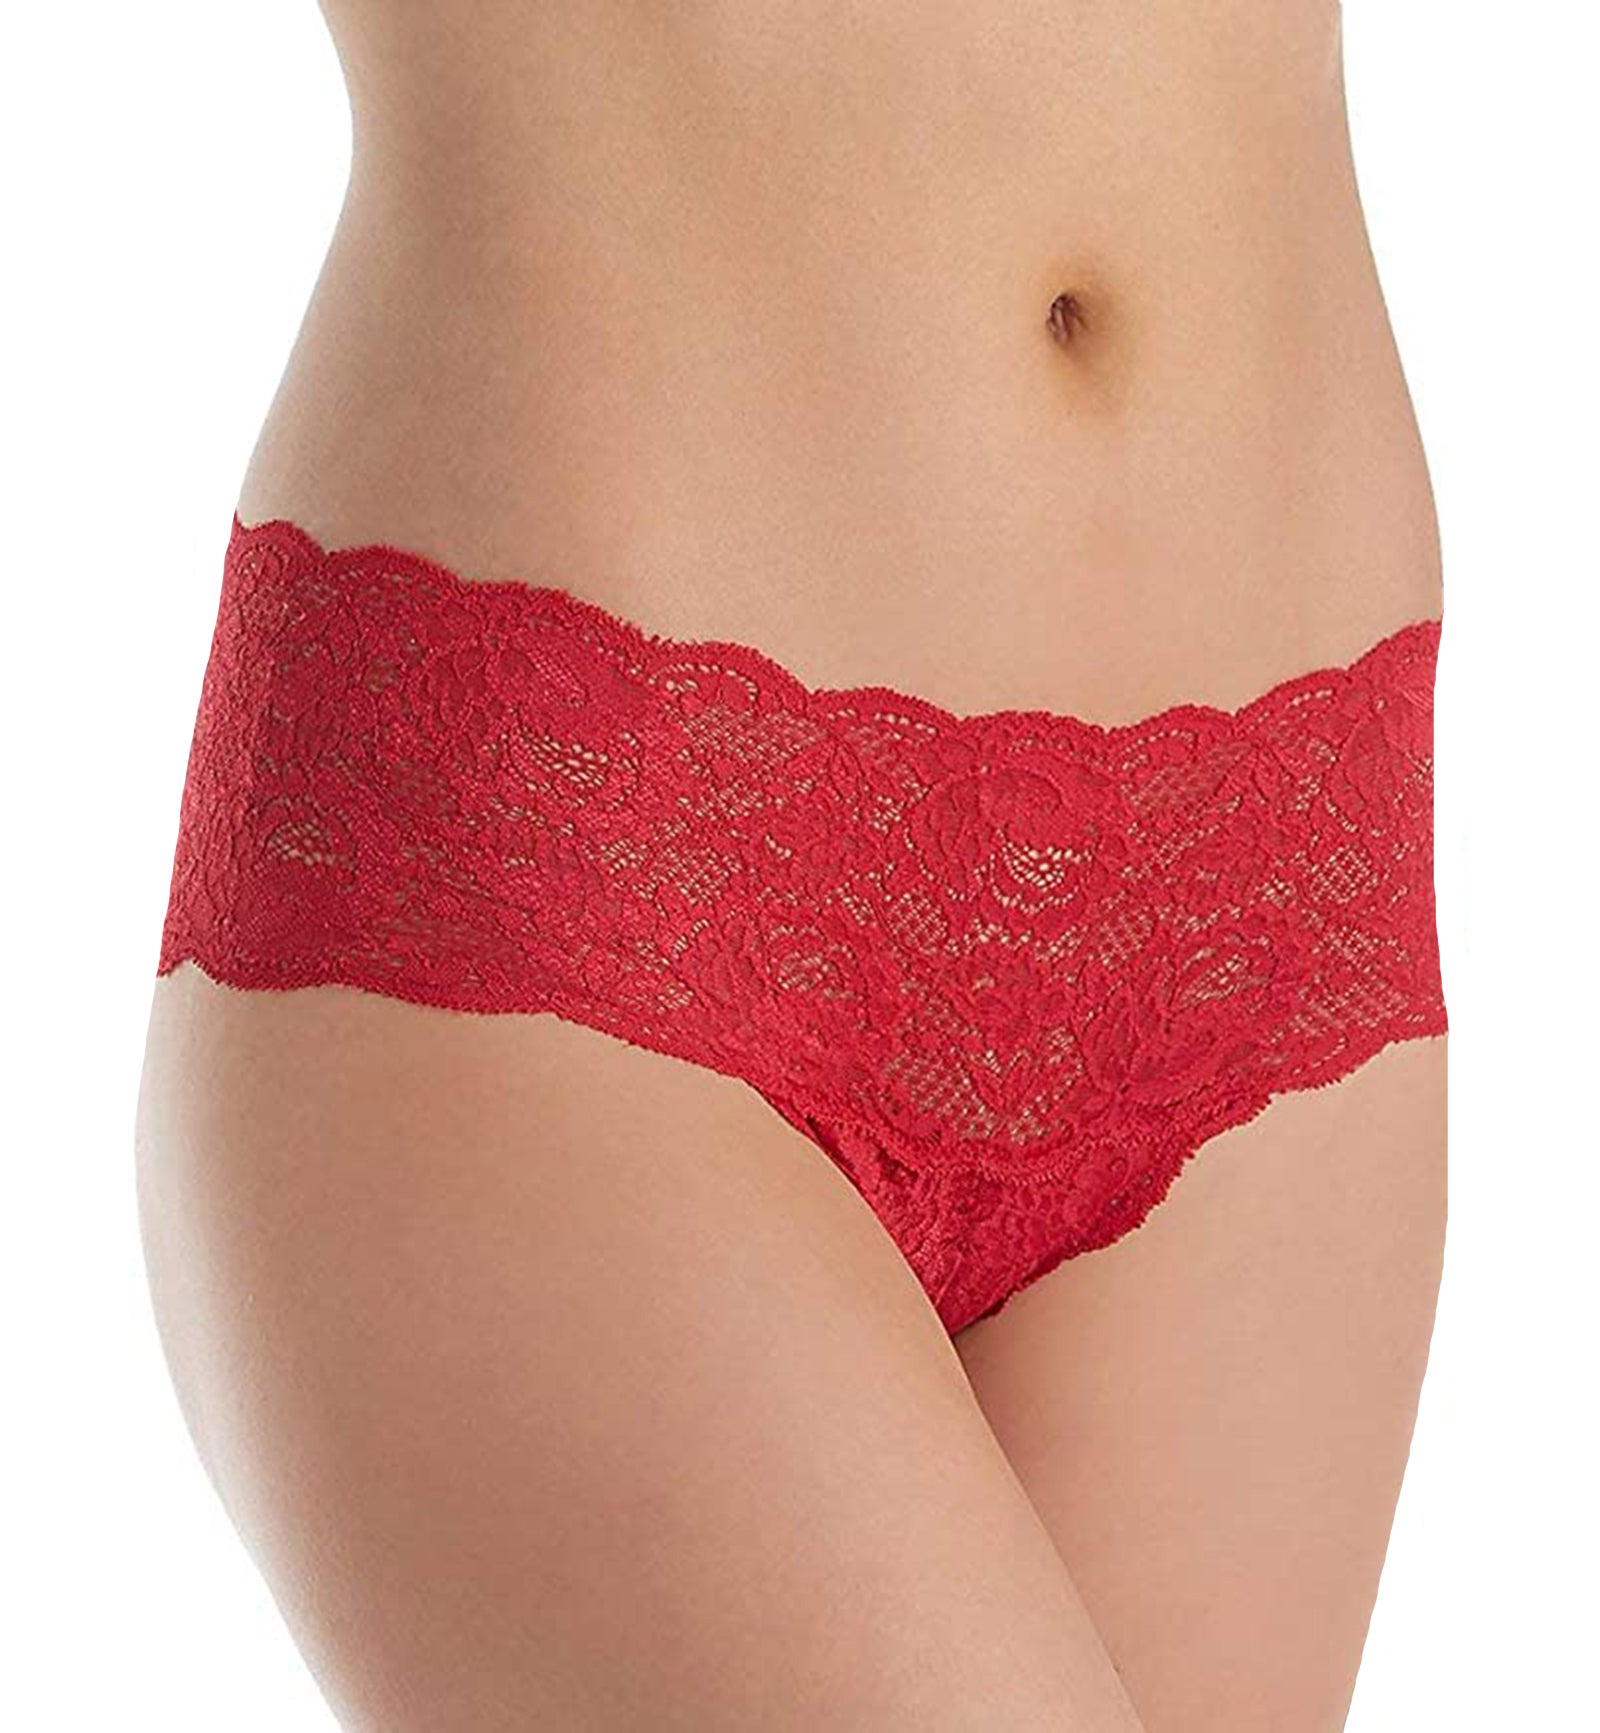 Cosabella Never Say Never Hottie Lowrider Hotpant (NEVER07ZL),S/M,Mystic Red - Mystic Red,S/M